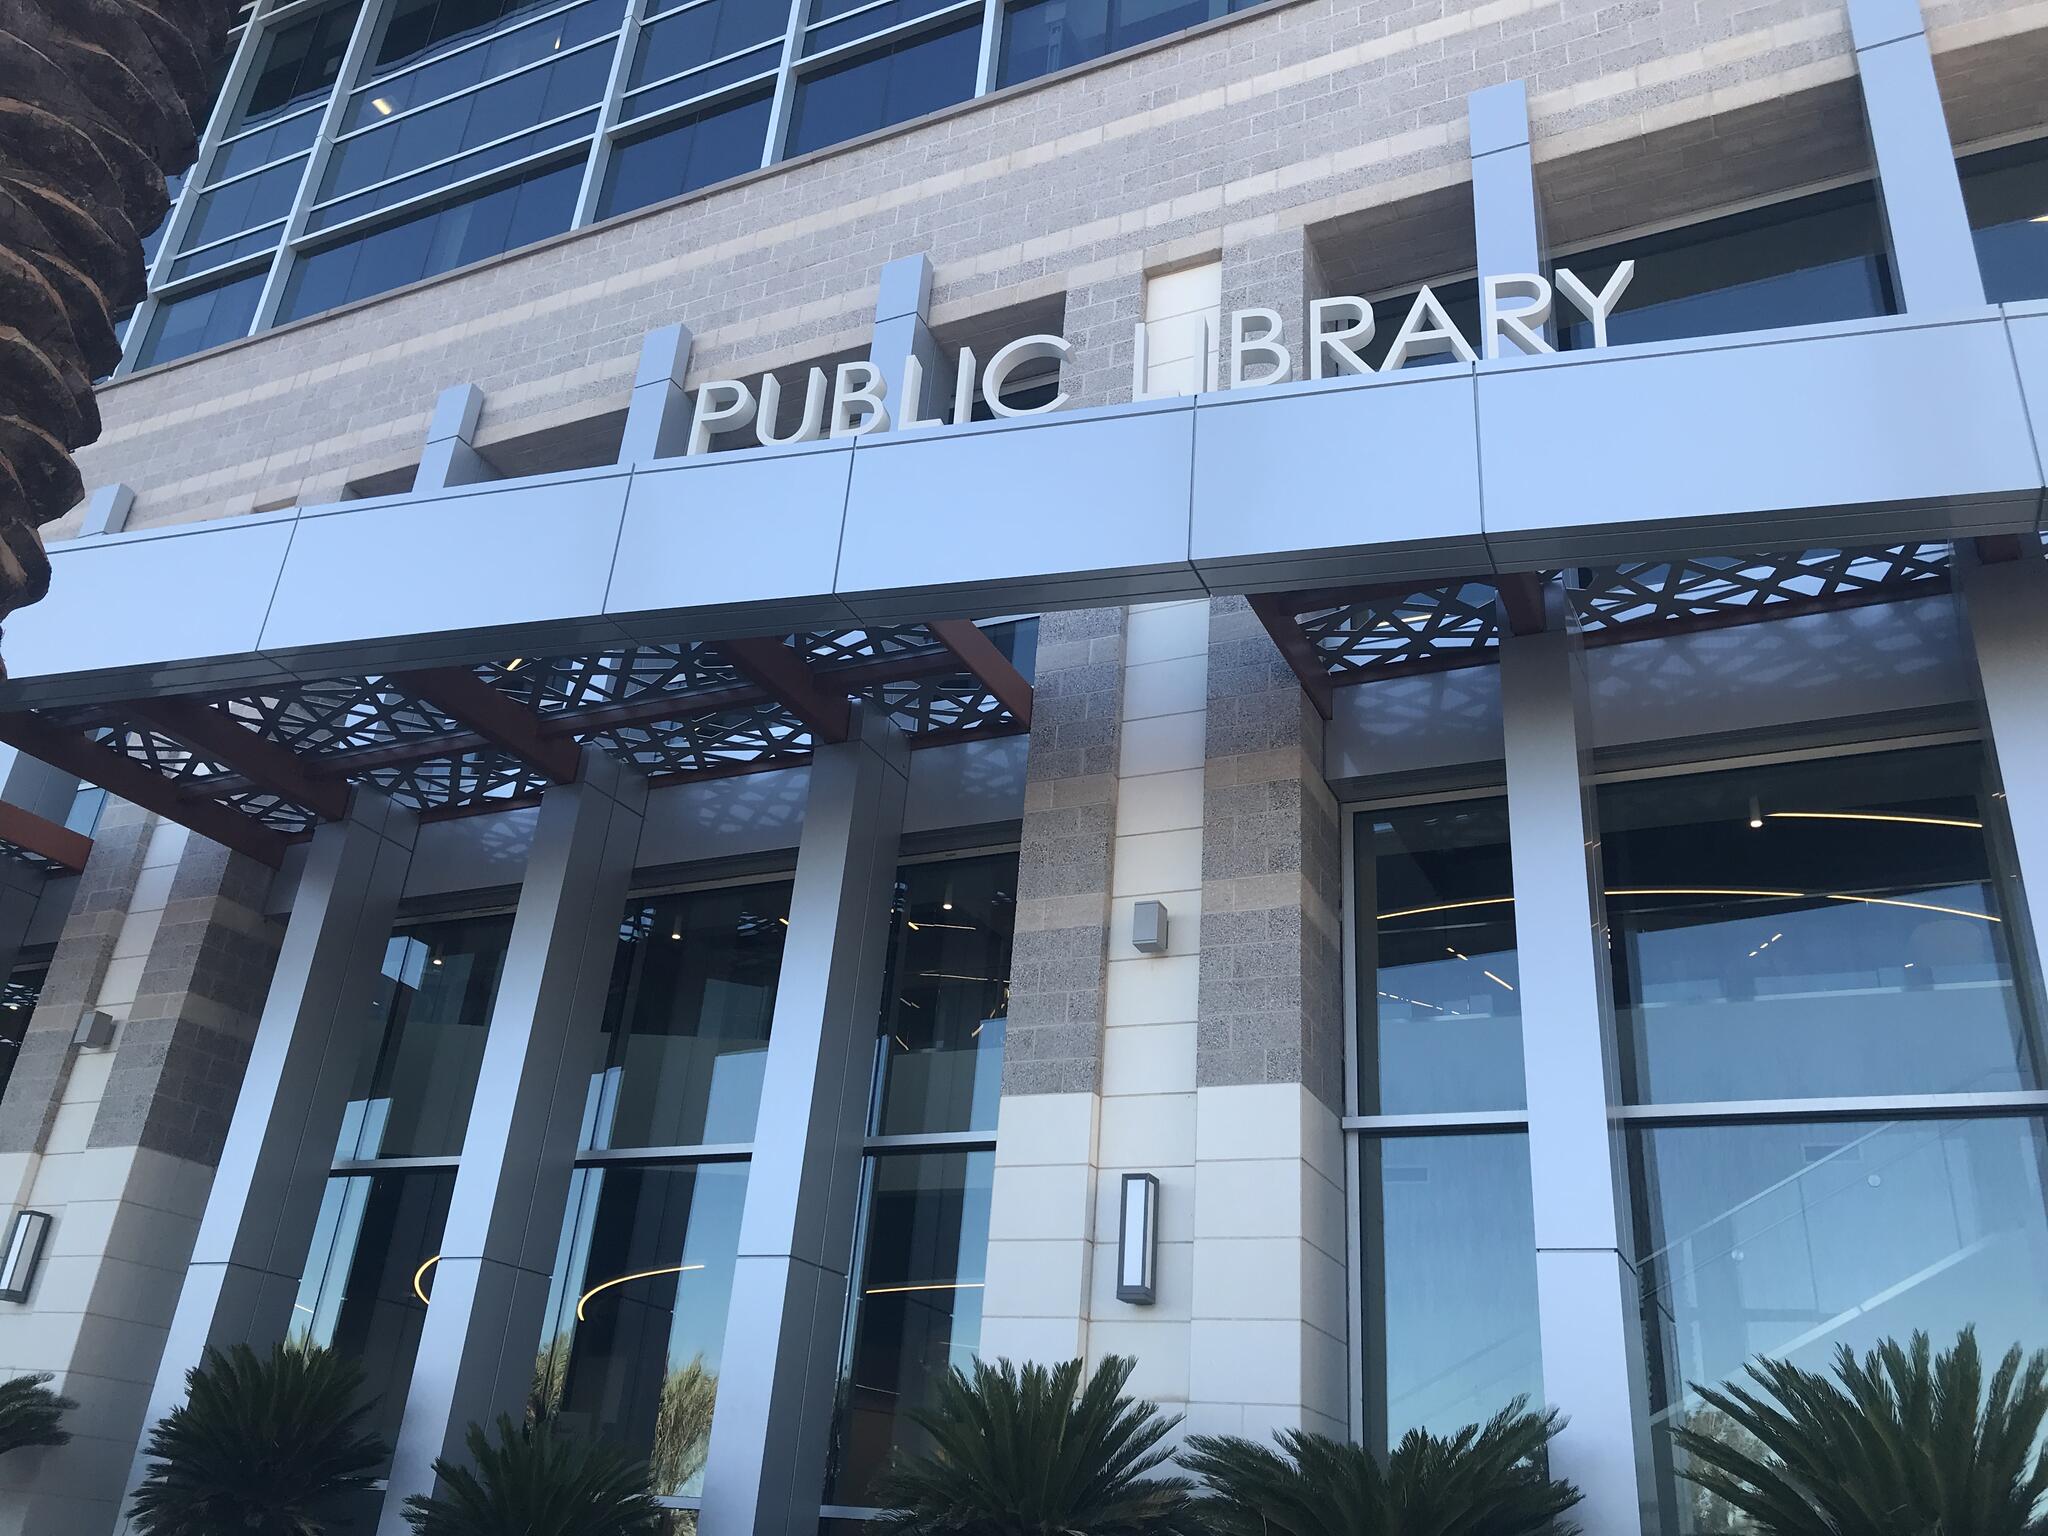 Goodyear Library Currently Closed for Move reopening August 1 (City